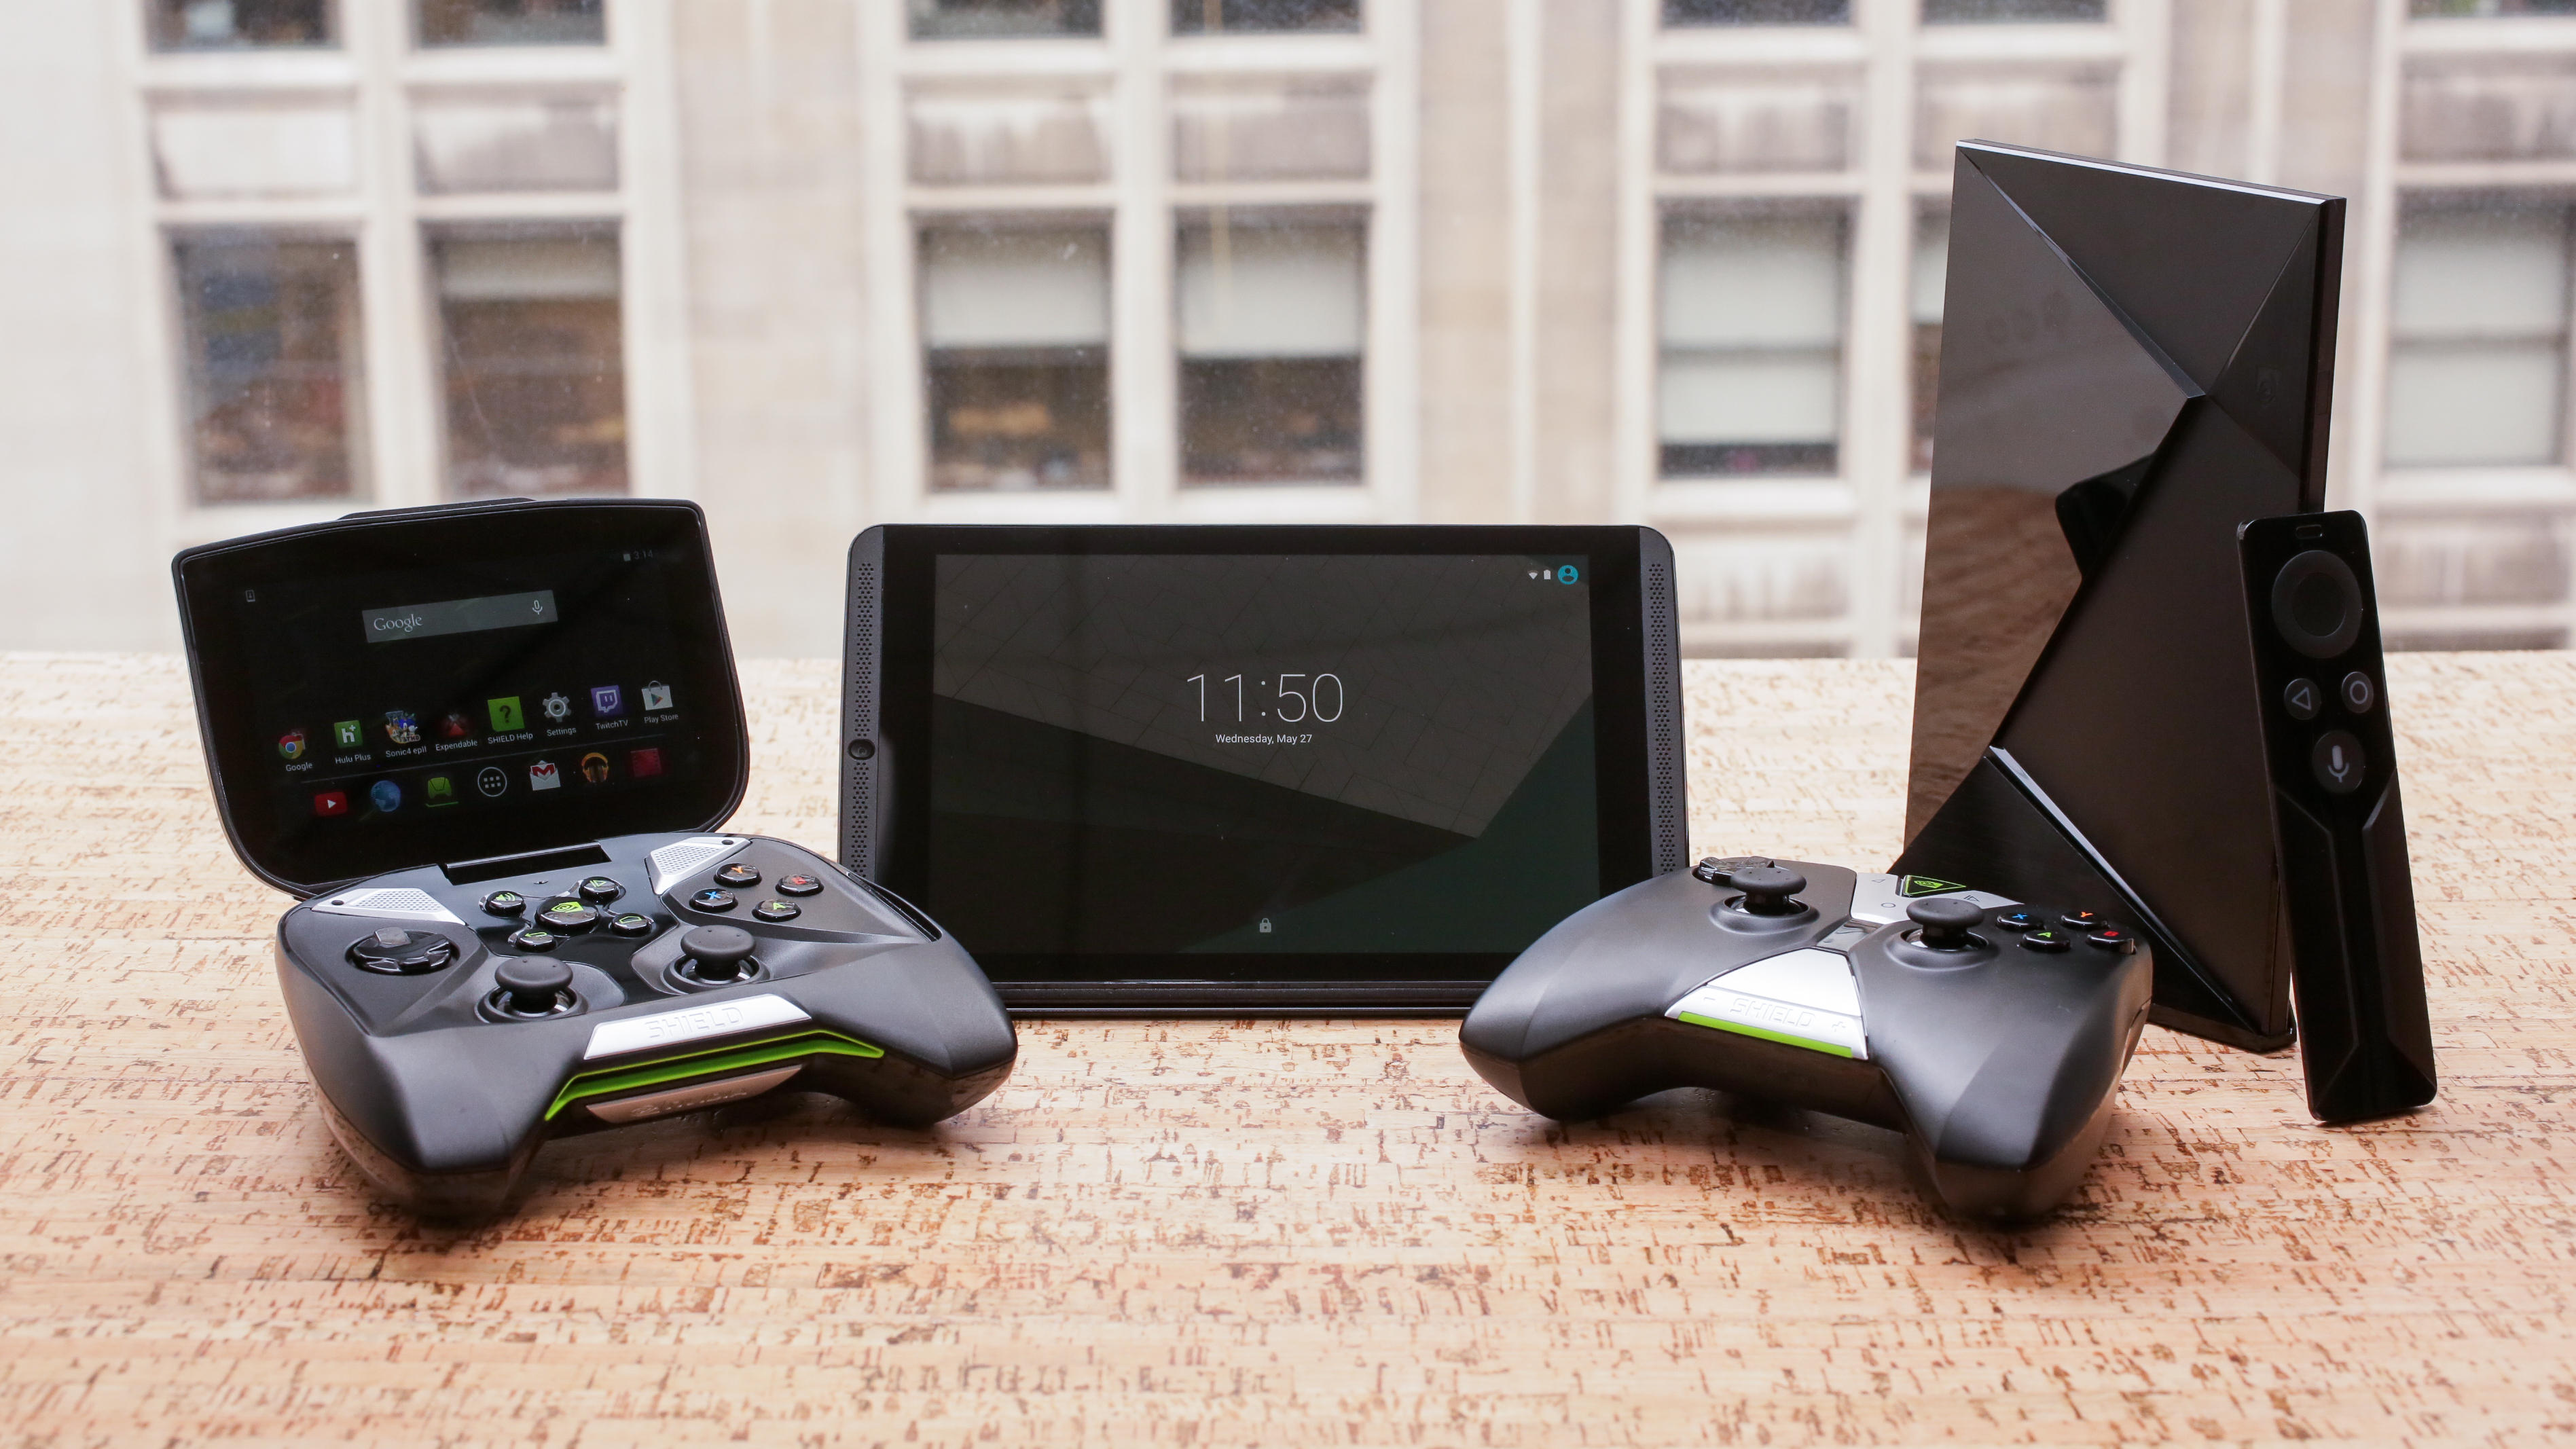 Nvidia Shield Android-based gaming console gets a price cut ahead of launch